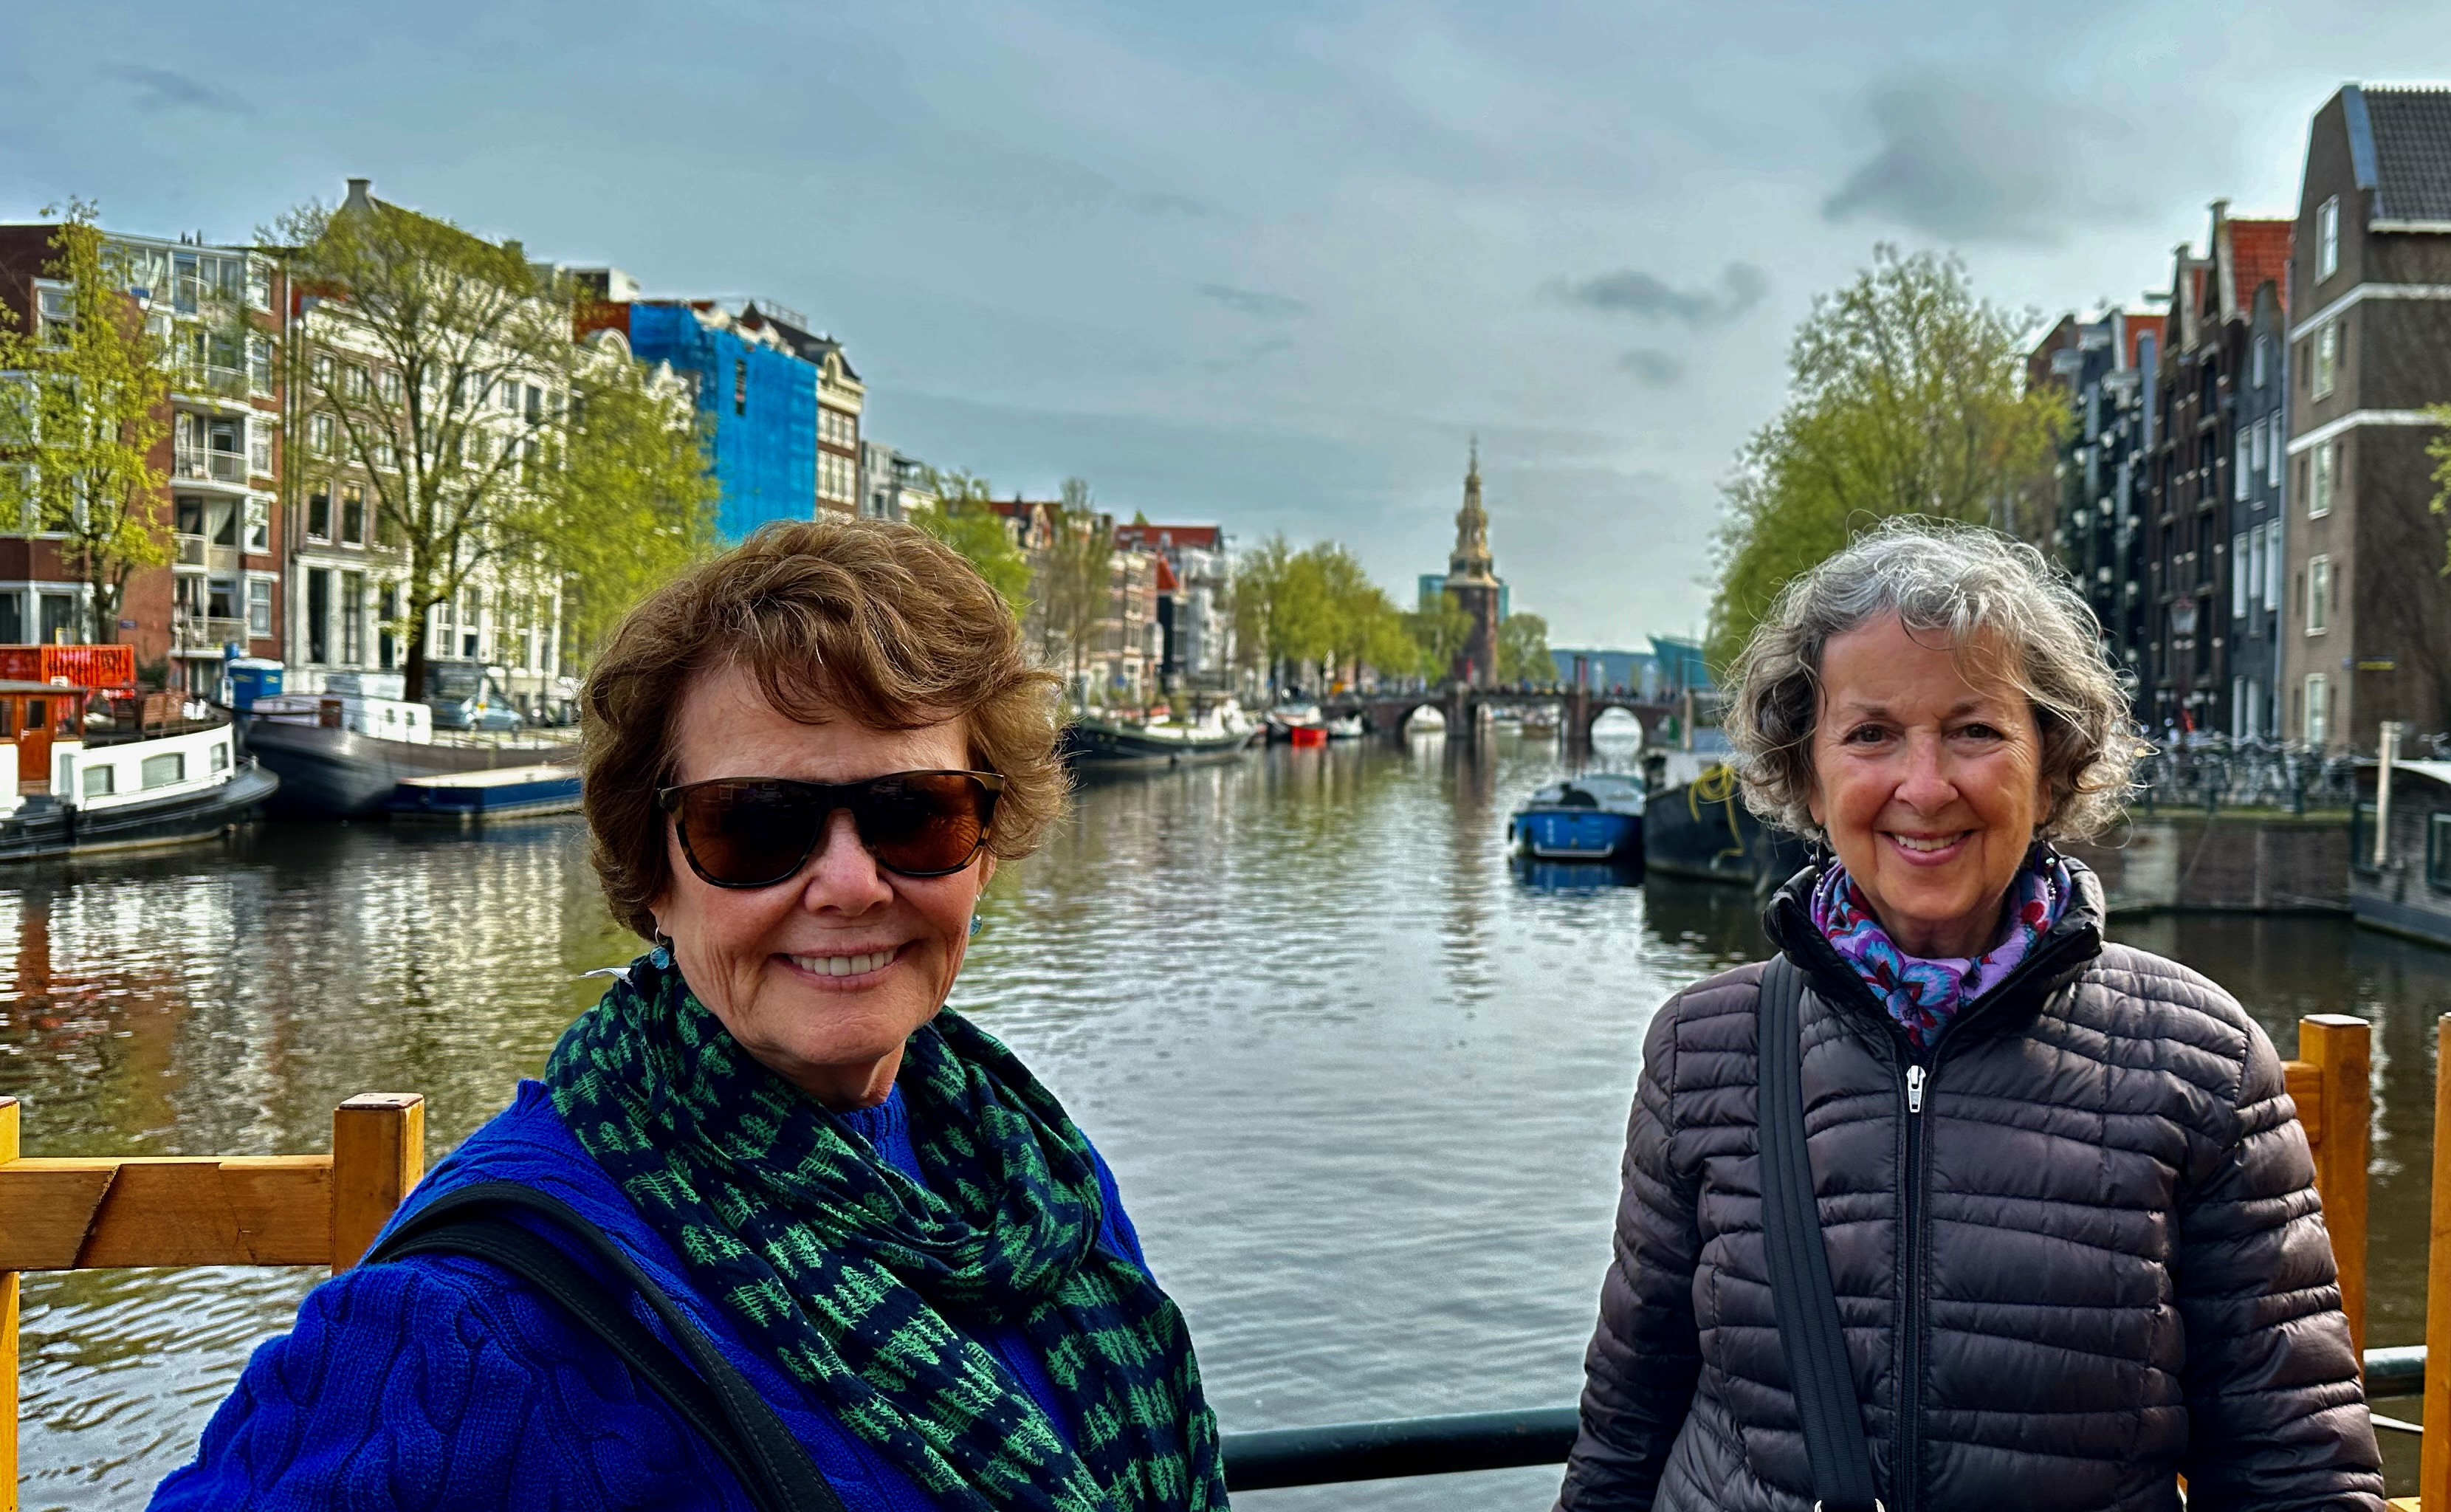 Peggy and Debbie in Amsterdam